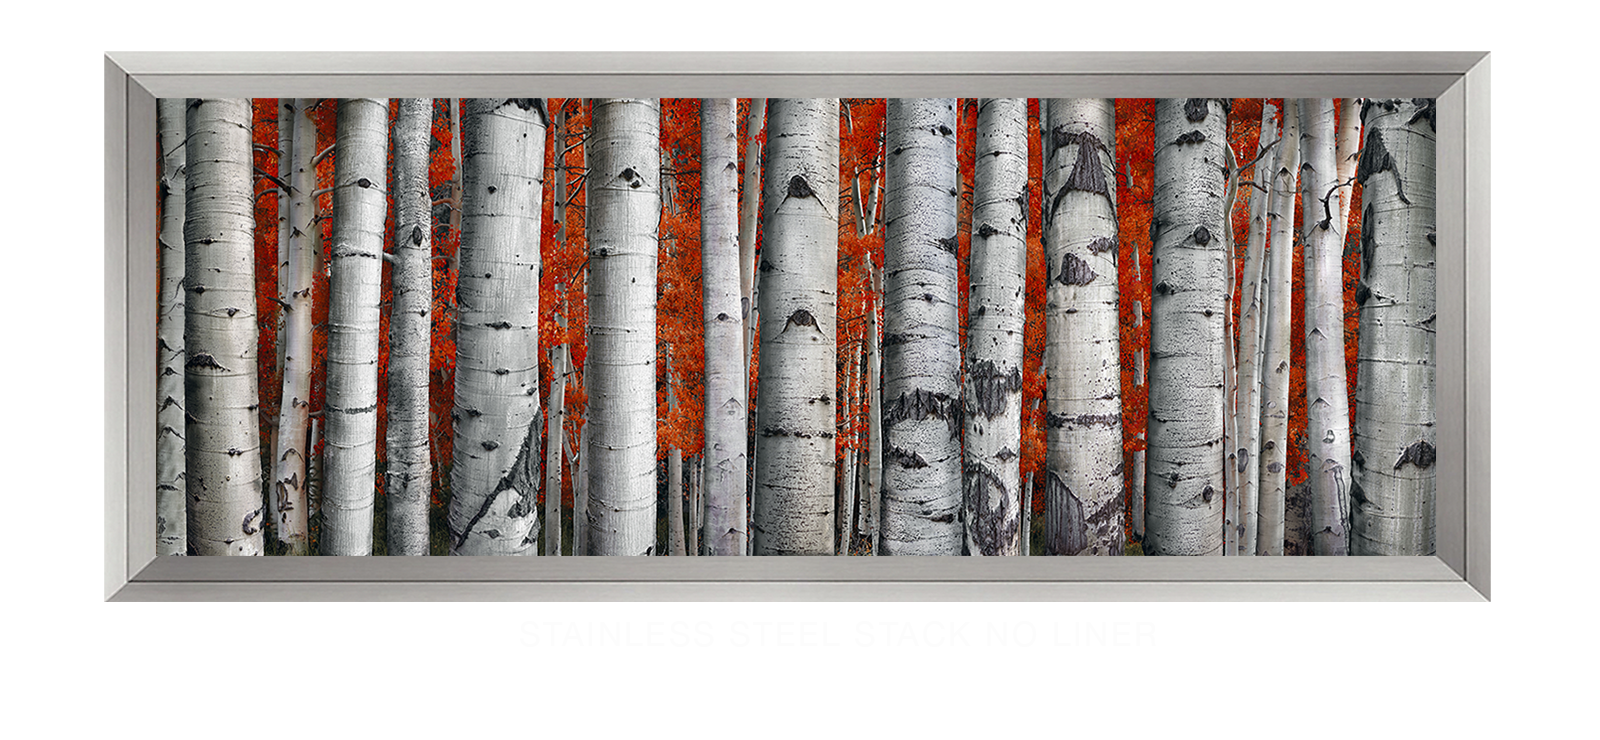 7ASPEN Stainless Steel Stack No Liner T